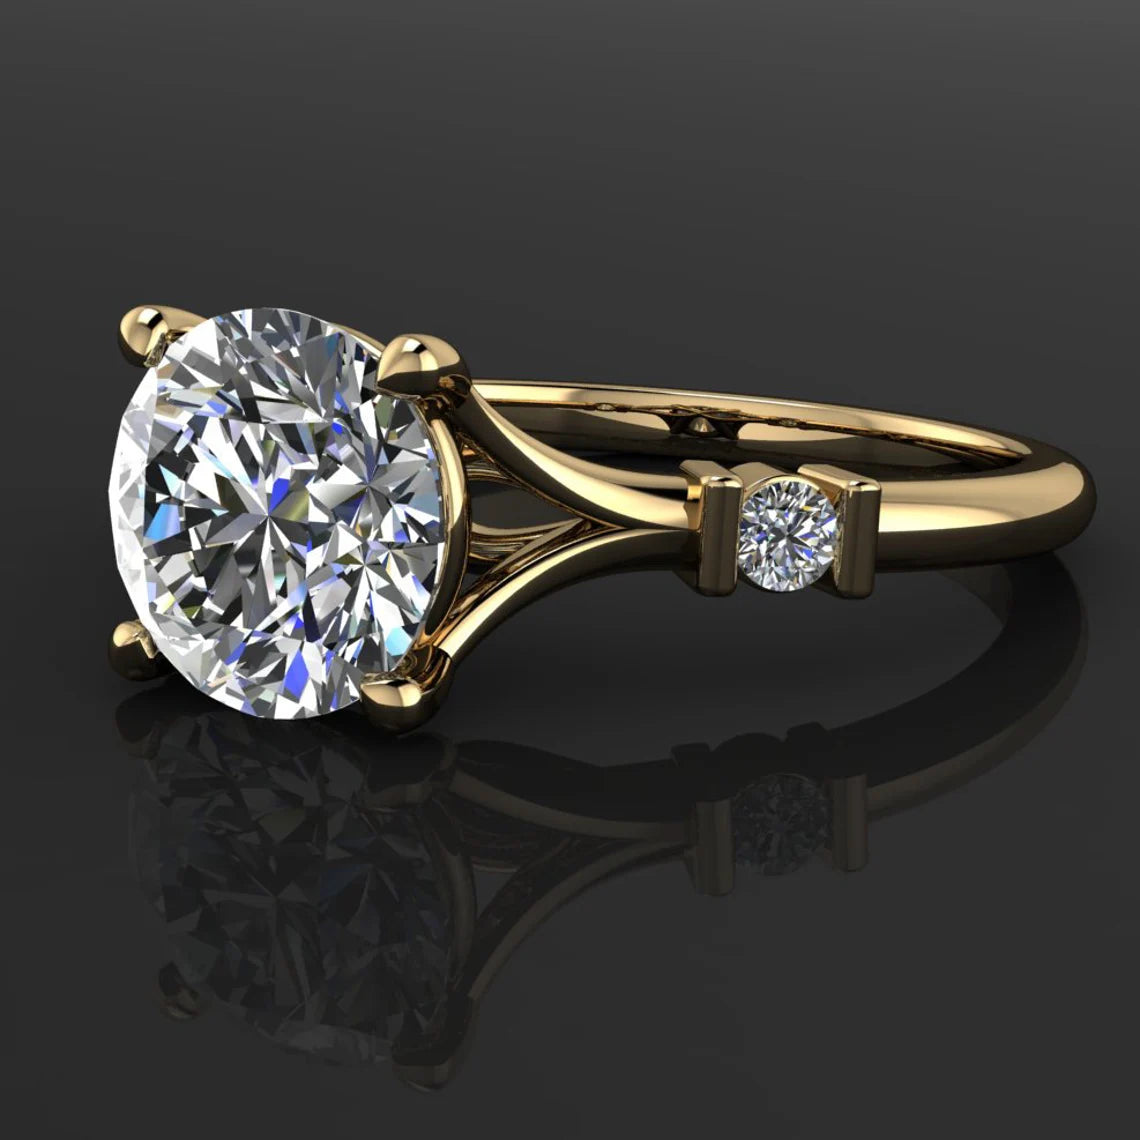 beckett ring - 1.5 carat round NEO moissanite and diamond engagement ring - J Hollywood Designs